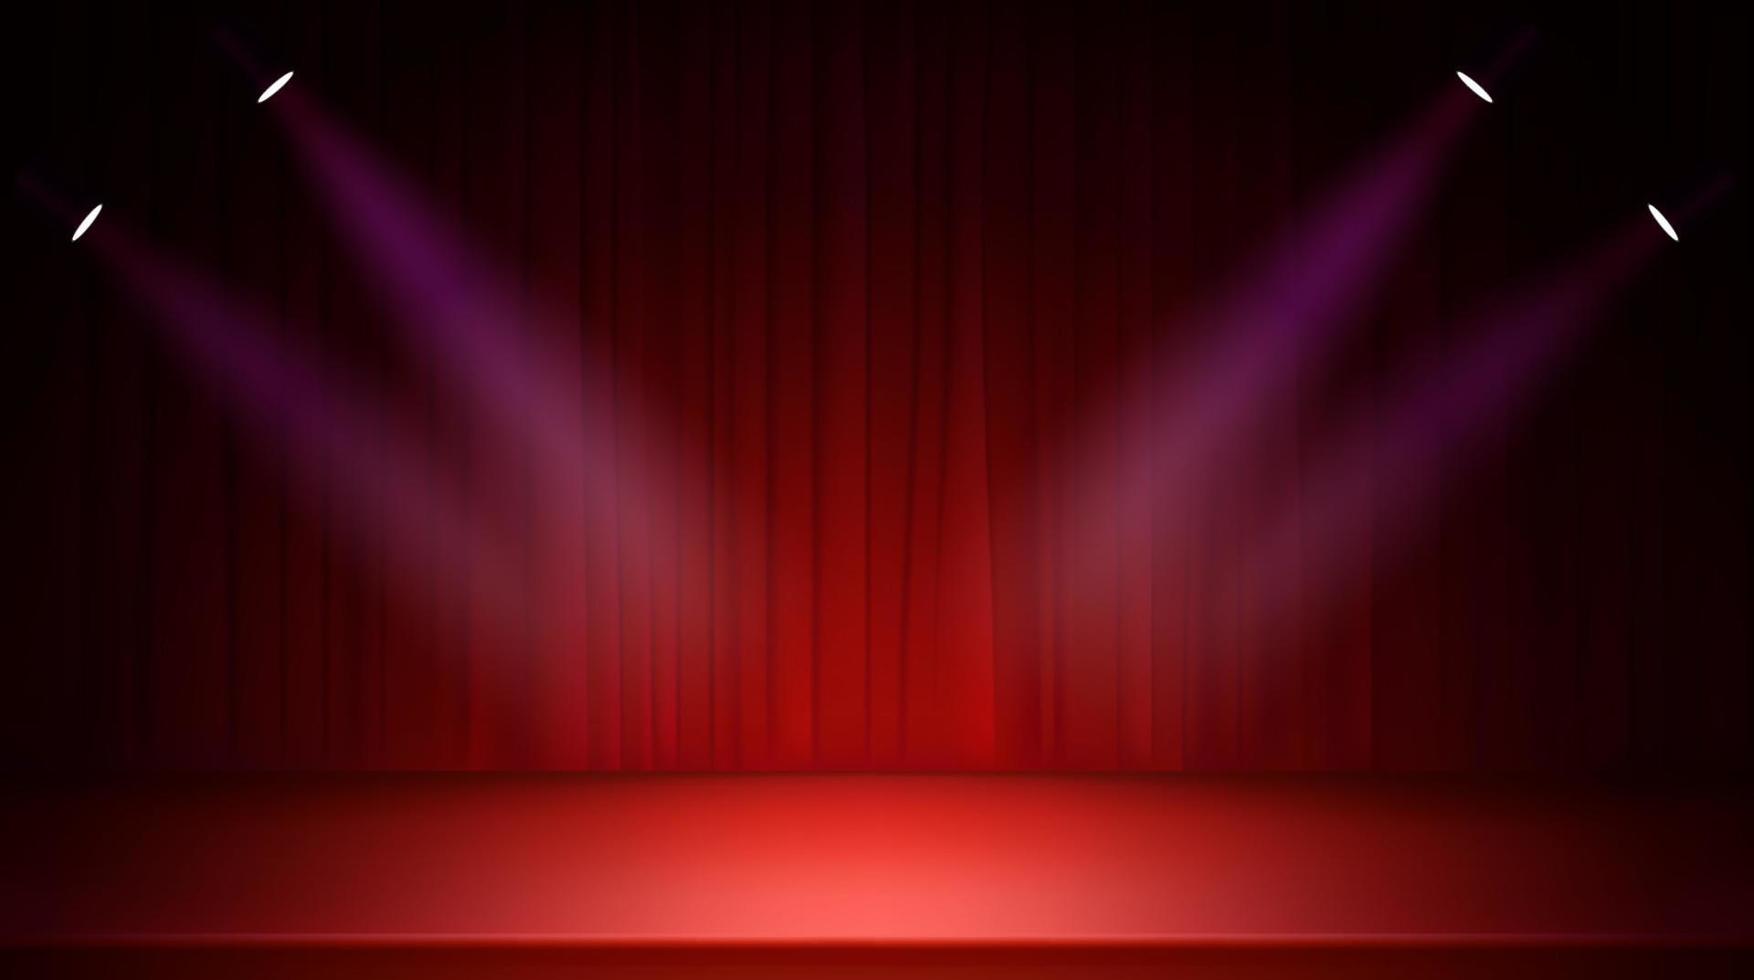 Bright stage with red curtains and spotlights. 3D style realistic vector illustration